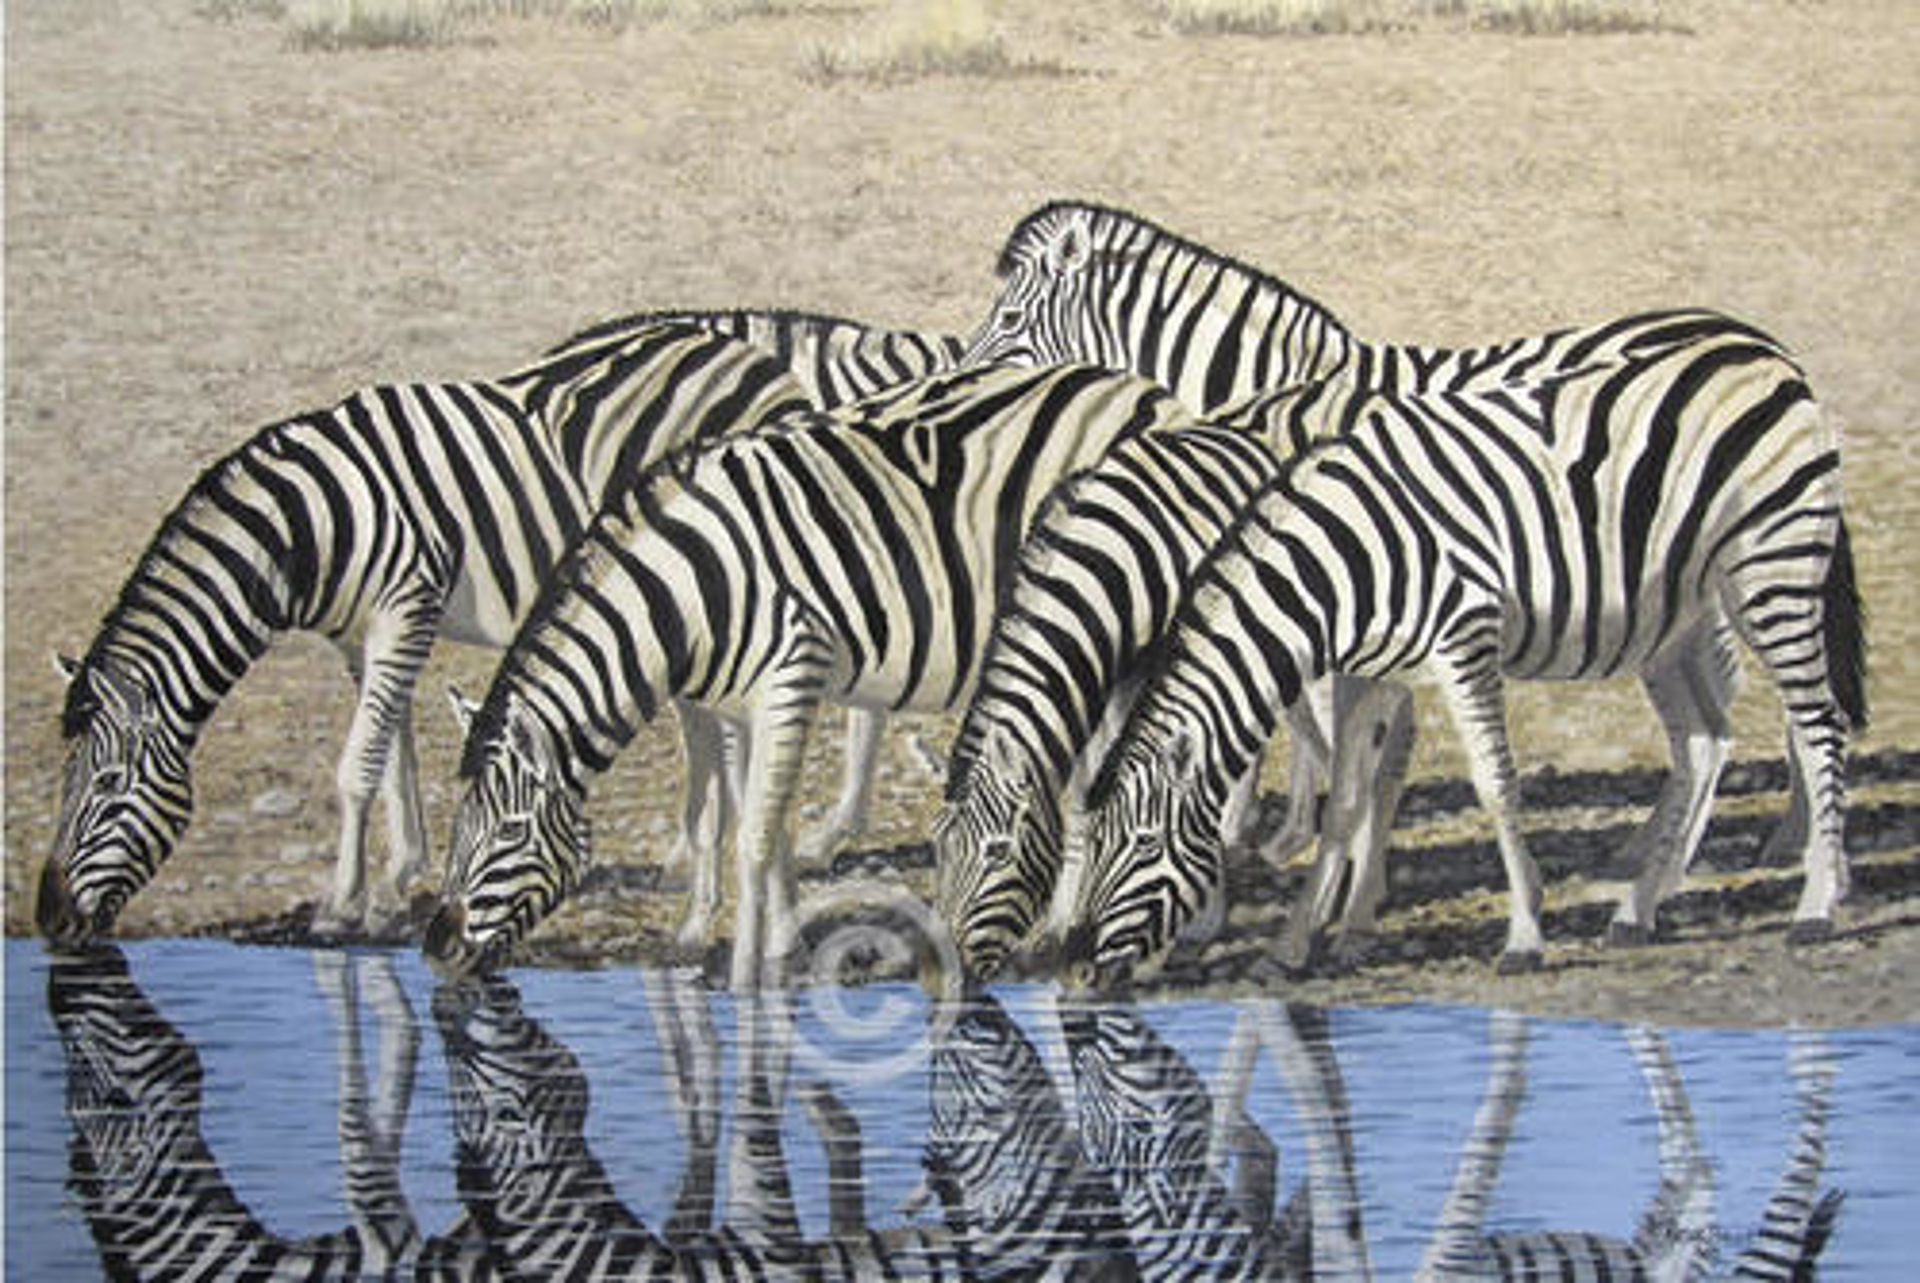 Zebra at the Watering Hole by Peter Bruce